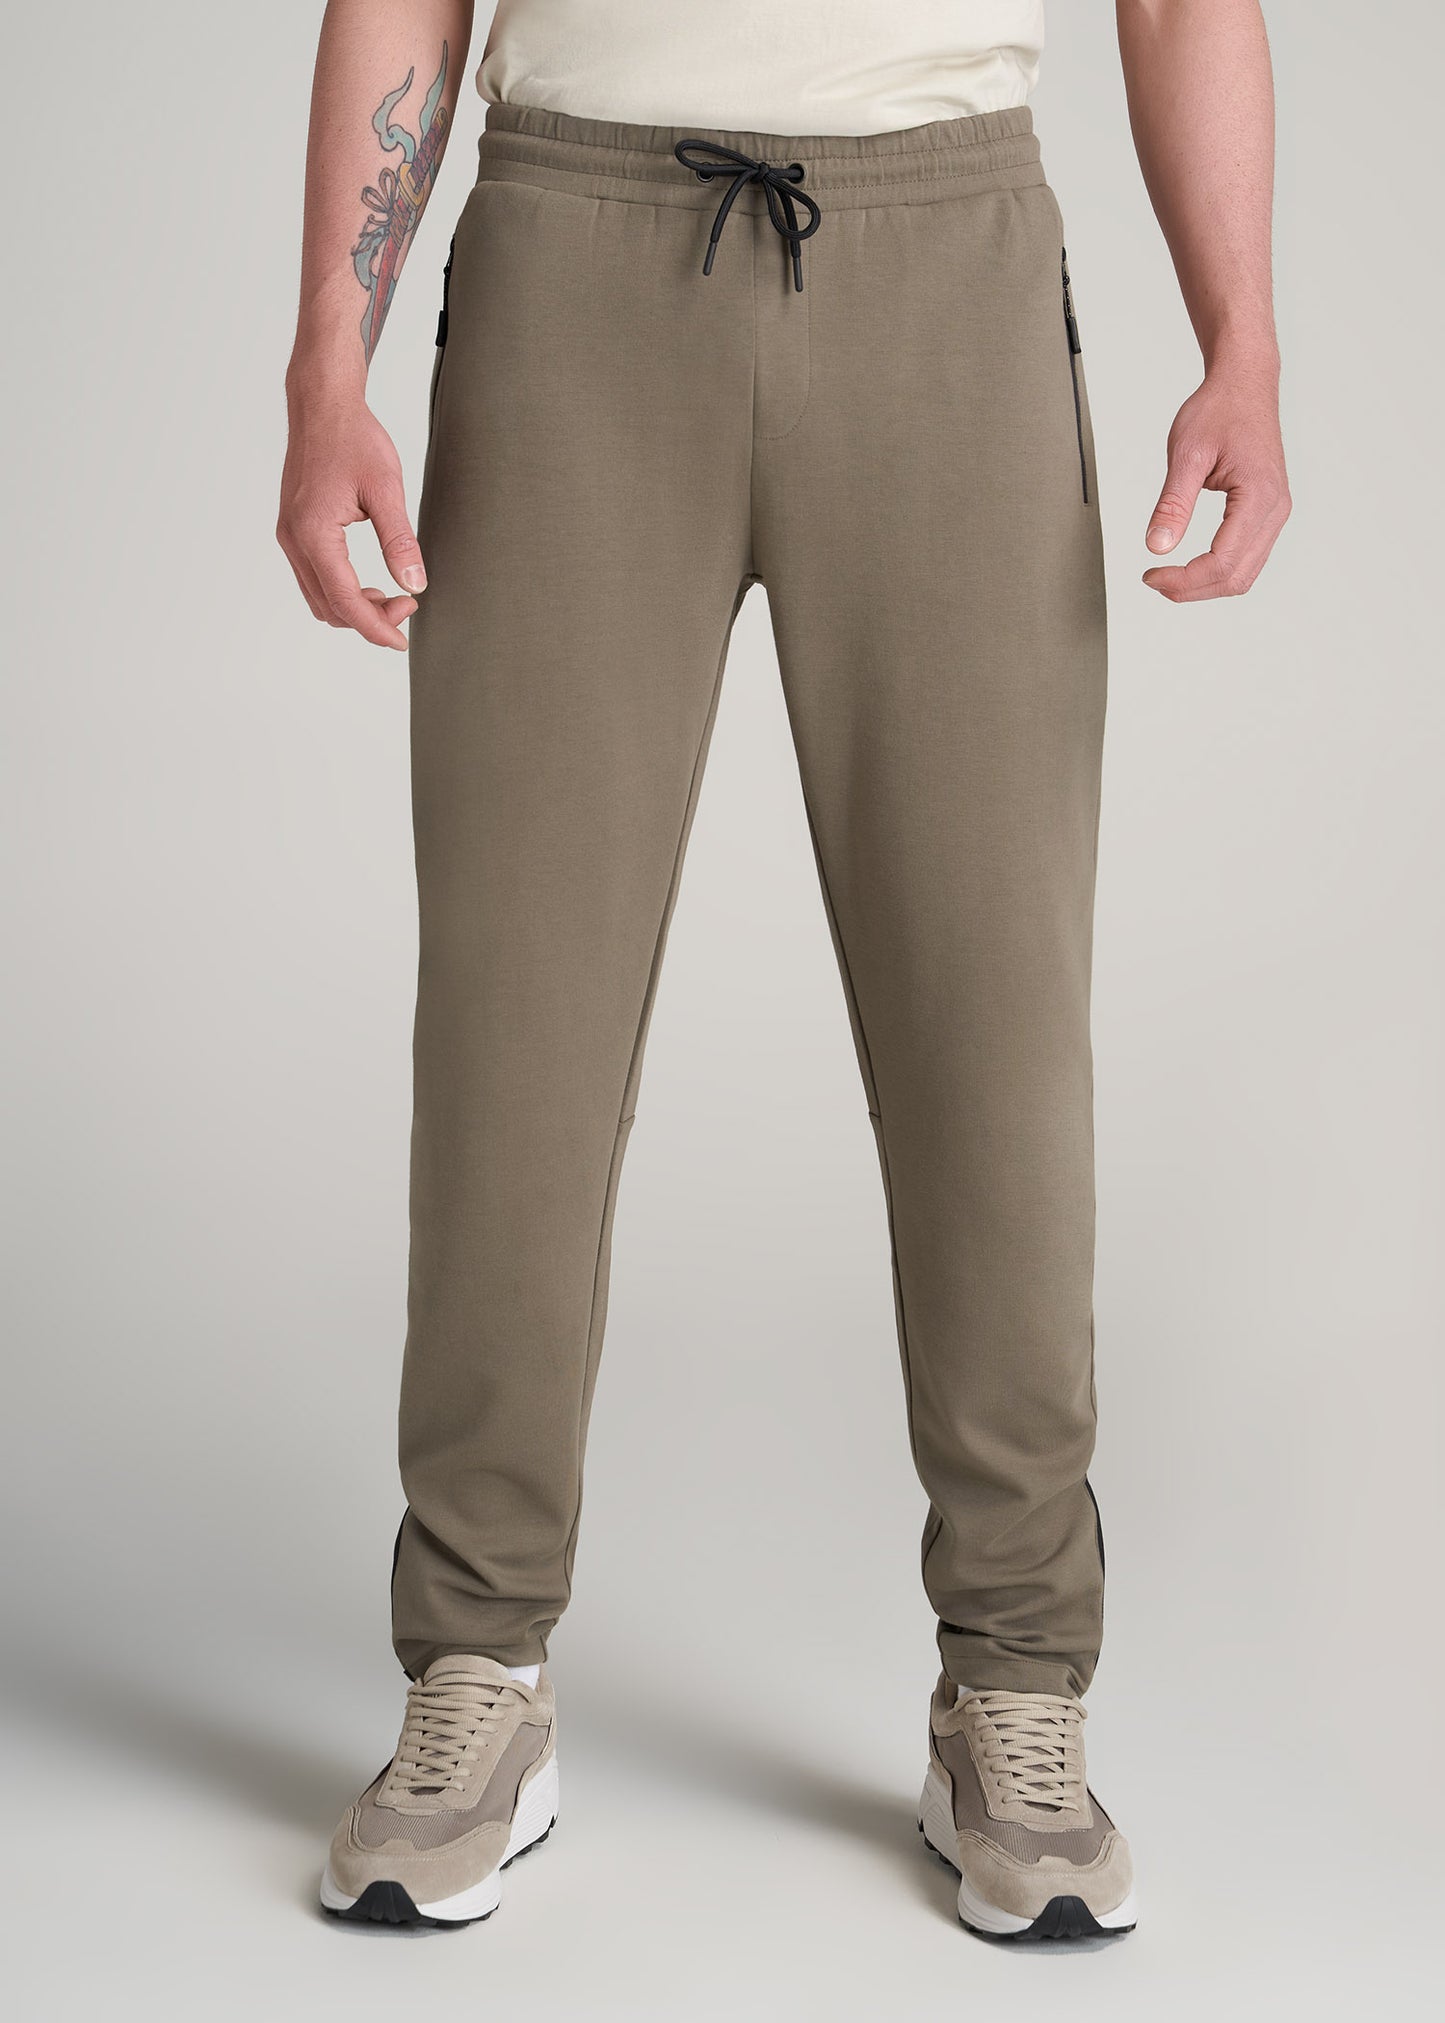     American-Tall-Men-Athleisure-Performance-Pant-Deep-Taupe-front